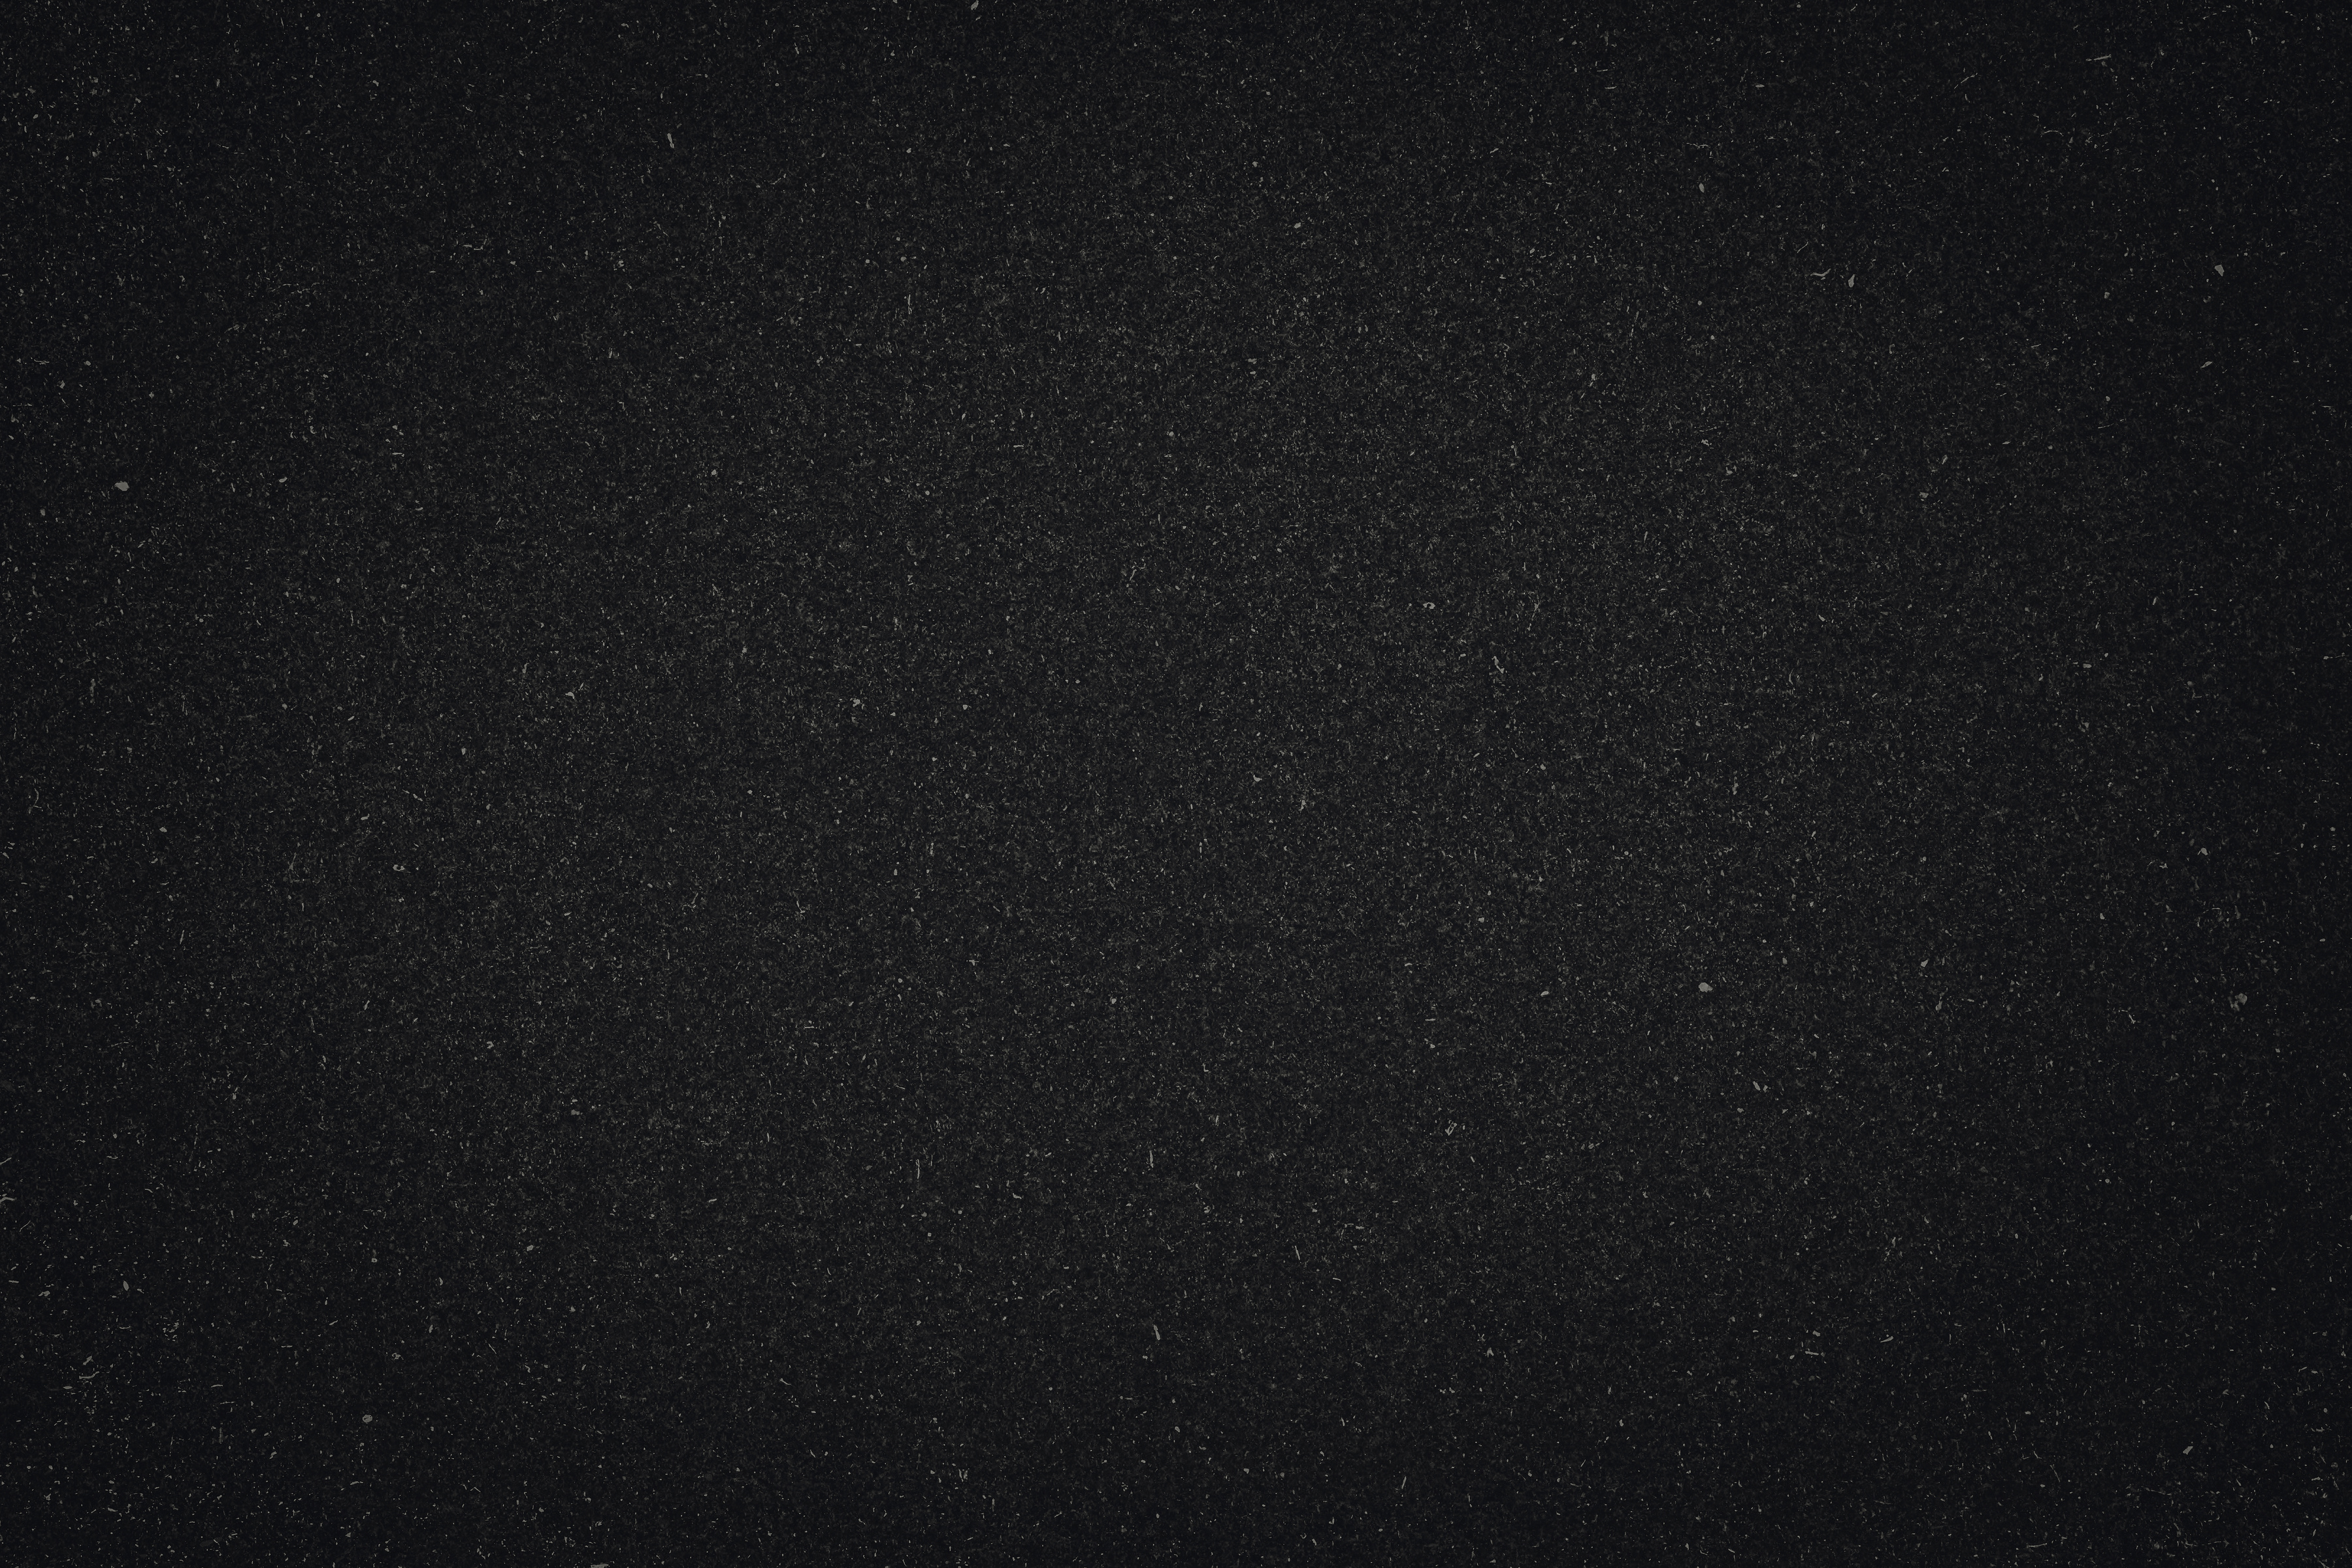 Black Paper Texture Cardboard Background, Grunge Old Recycled Pa